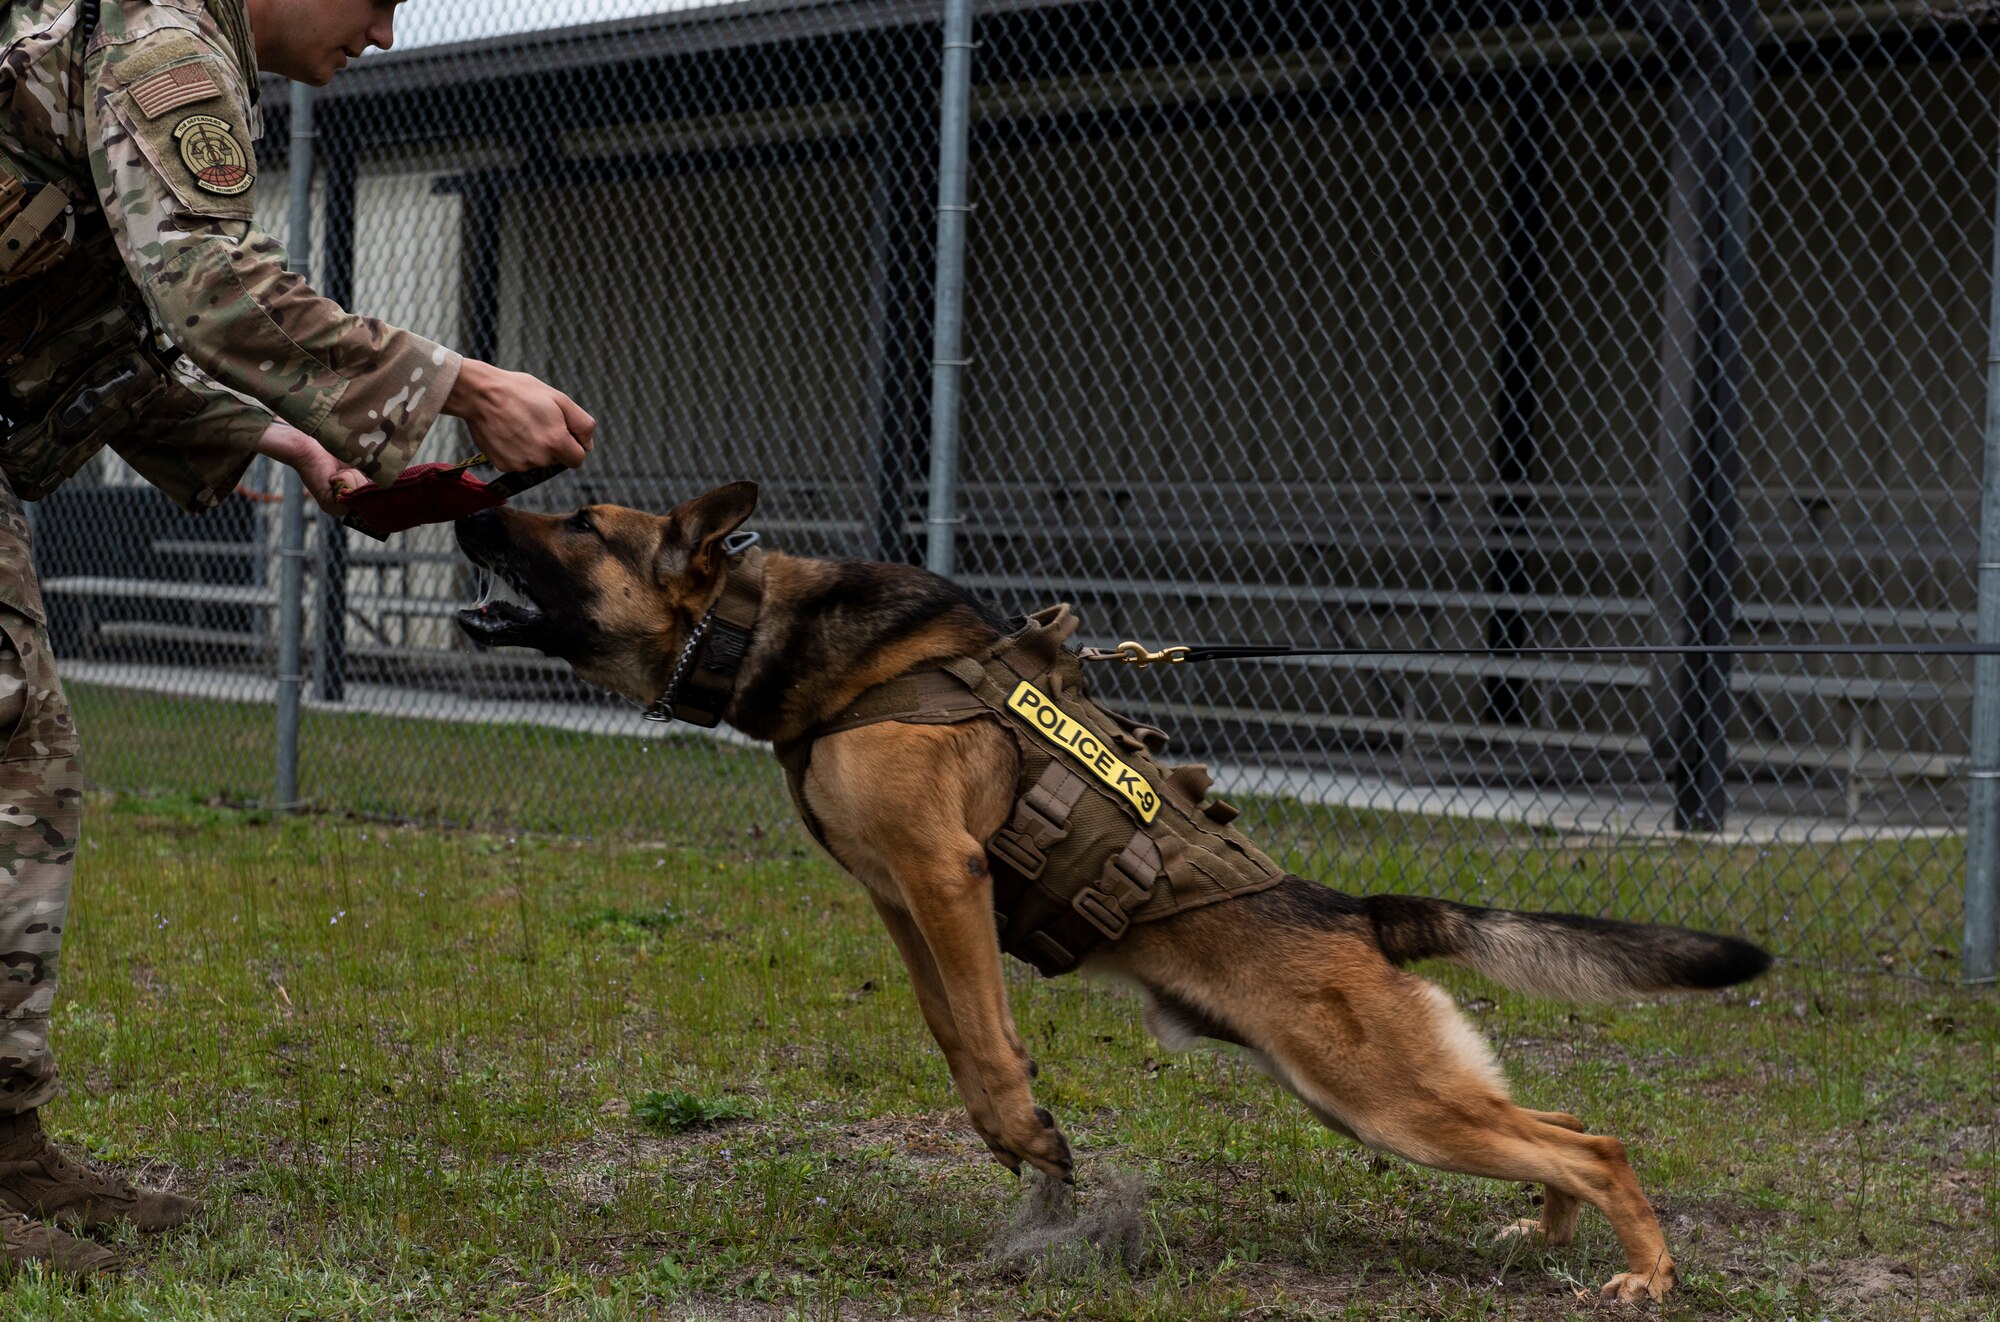 Sunny, a 325th Security Forces Squadron military working dog, lunges at a piece of equipment used to train K-9s on their bite technique at Tyndall Air Force Base, Florida, March 3, 2020. Sunny and his handler, Staff Sgt. Jason Vogt, spend multiple hours training together to keep the team sharp. This photo was taken while doing a demonstration for K-9 Veterans Day. (U.S. Air Force photo by Staff Sgt. Magen M. Reeves)